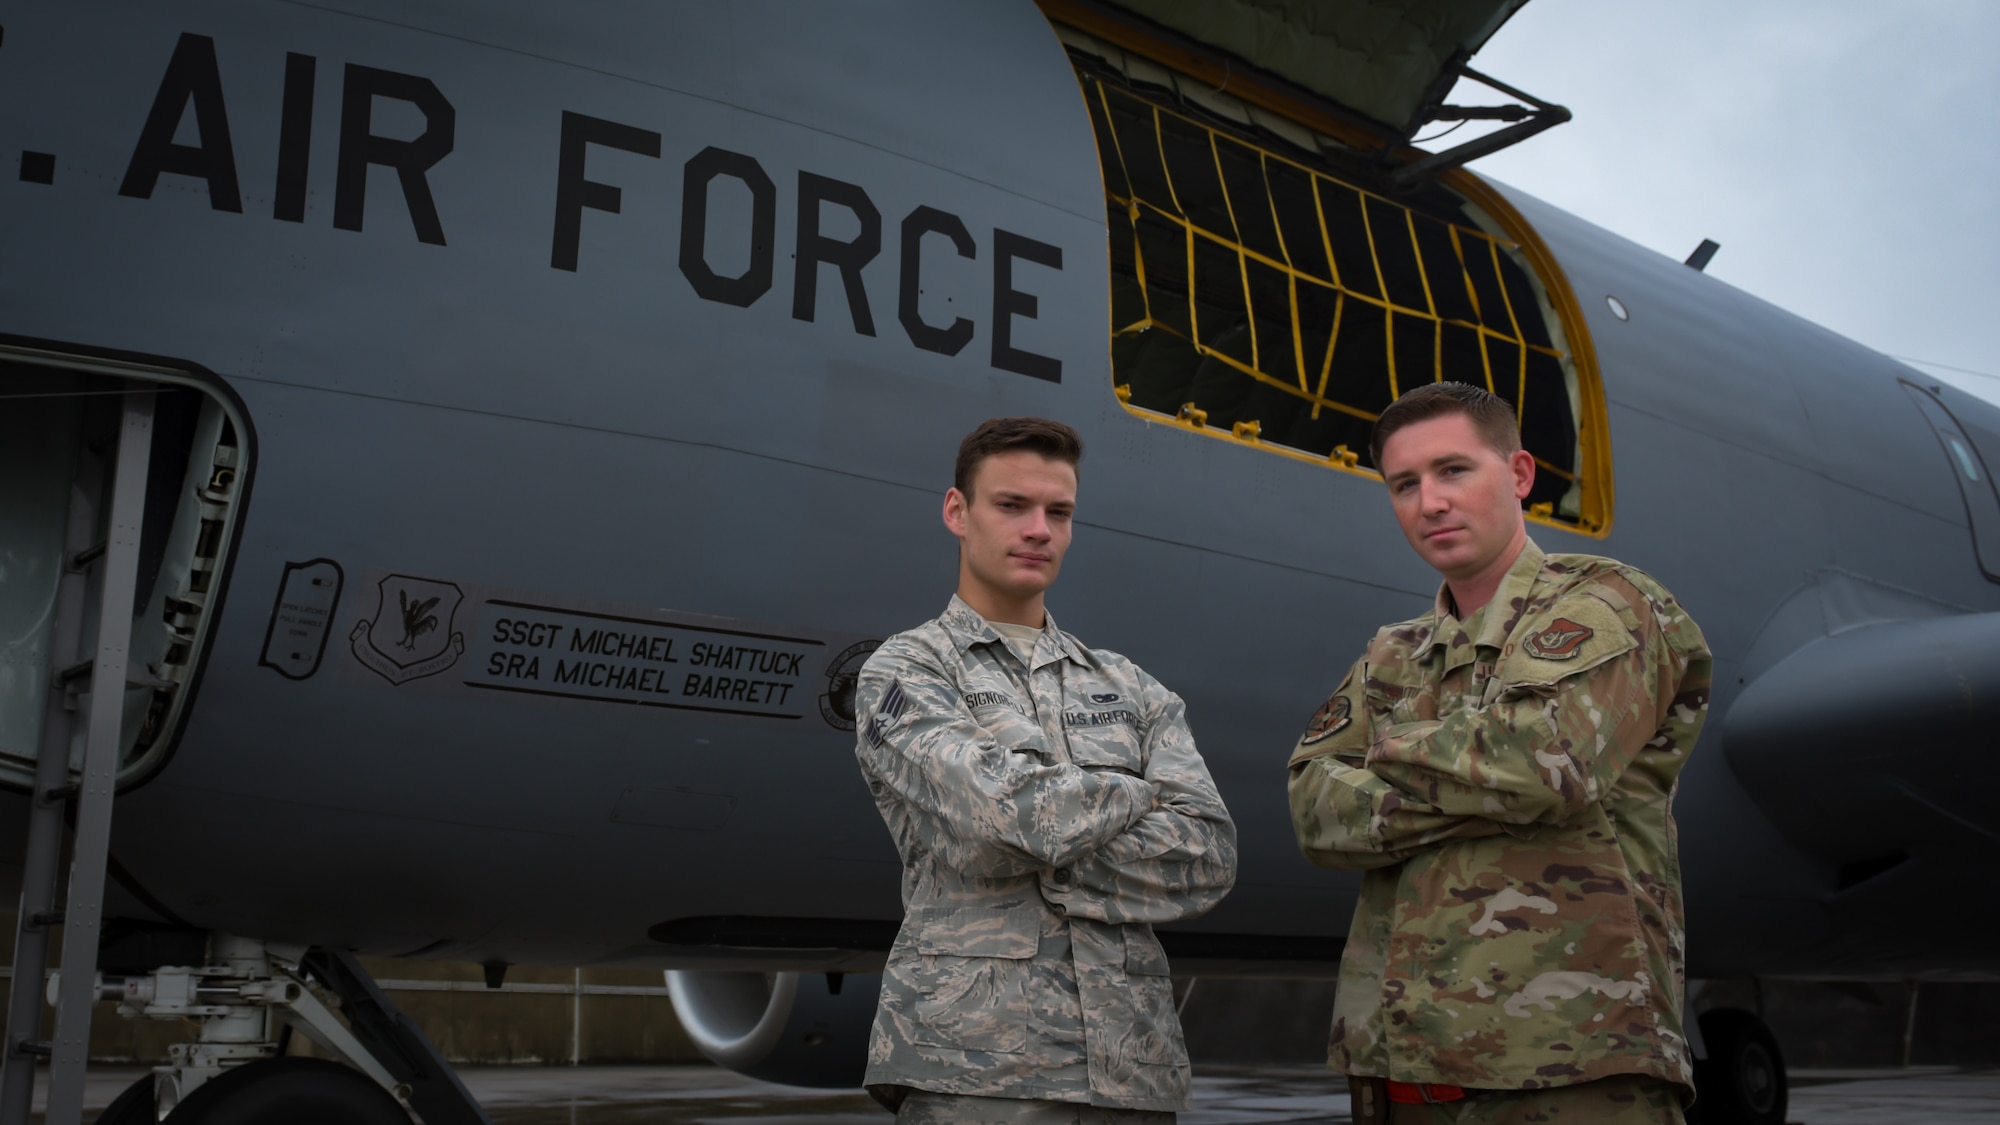 Senior Airman Michael Barrett, left, and Staff Sgt. Michael Shattuck, crew chiefs assigned to the 718th Aircraft Maintenance Squadron poses for a photo on Kadena Air Base, June 24, 2019.